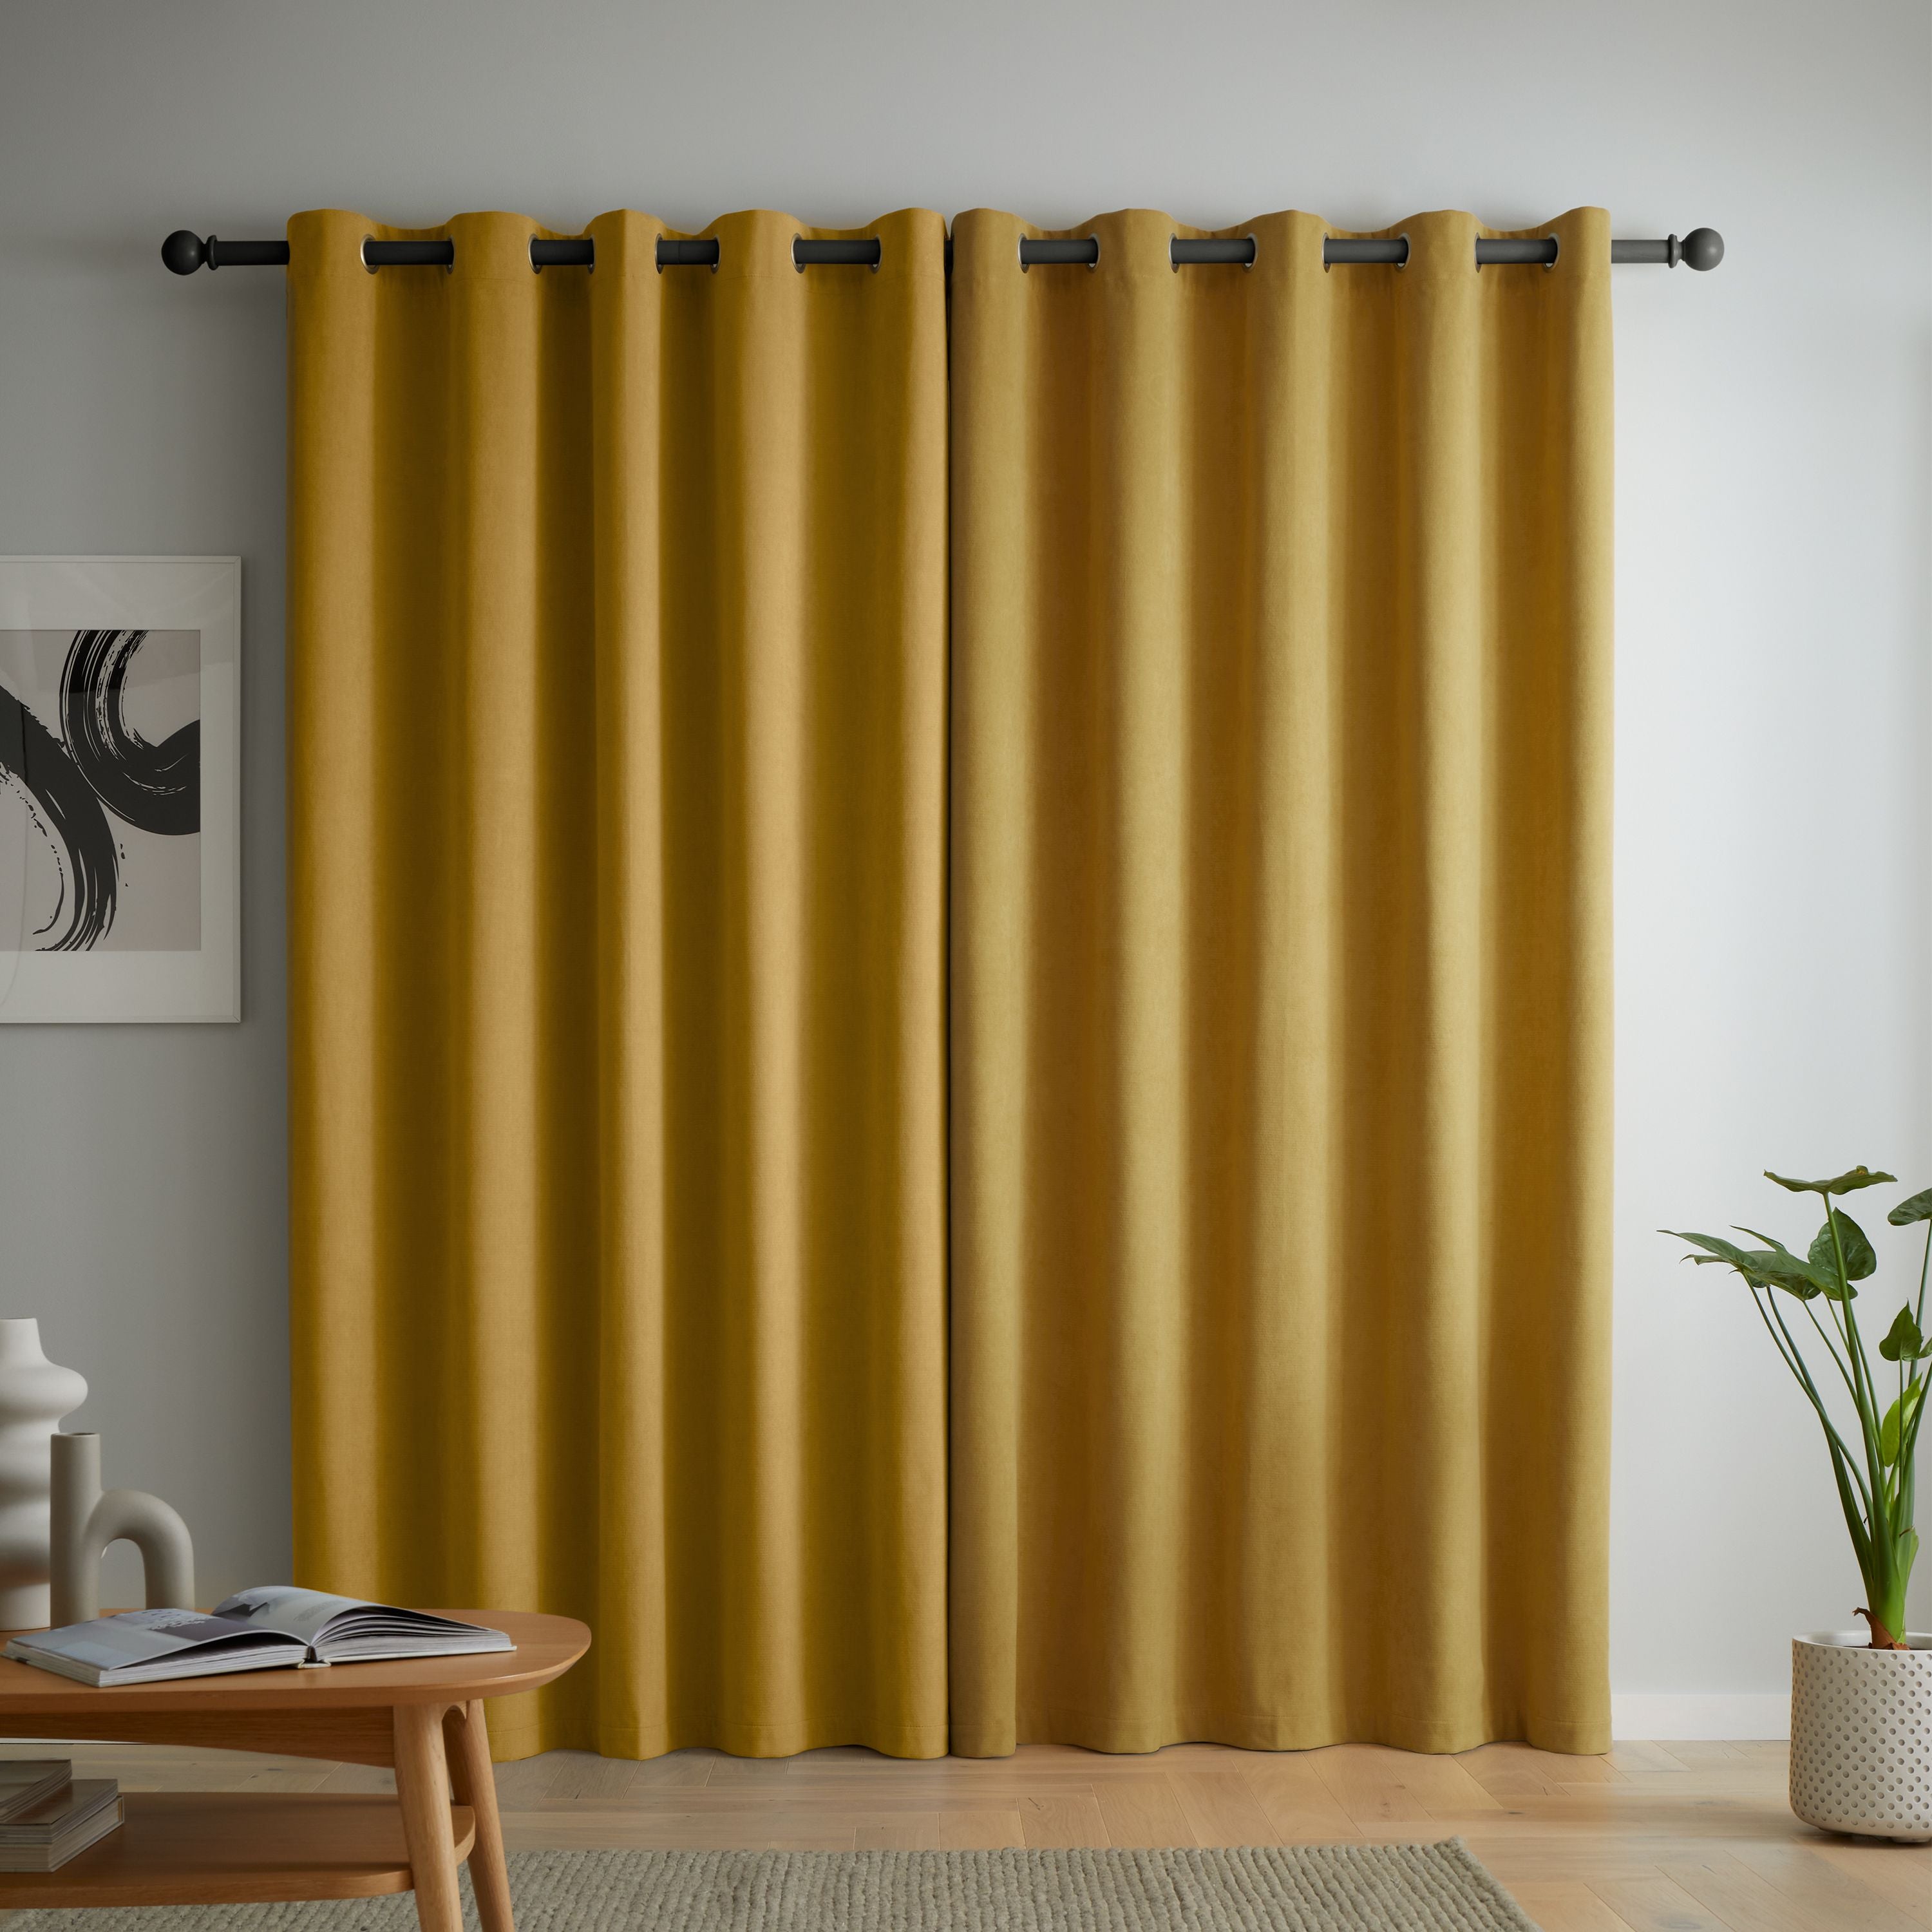 Wilson Blackout Thermal Eyelet Curtains, Yellow